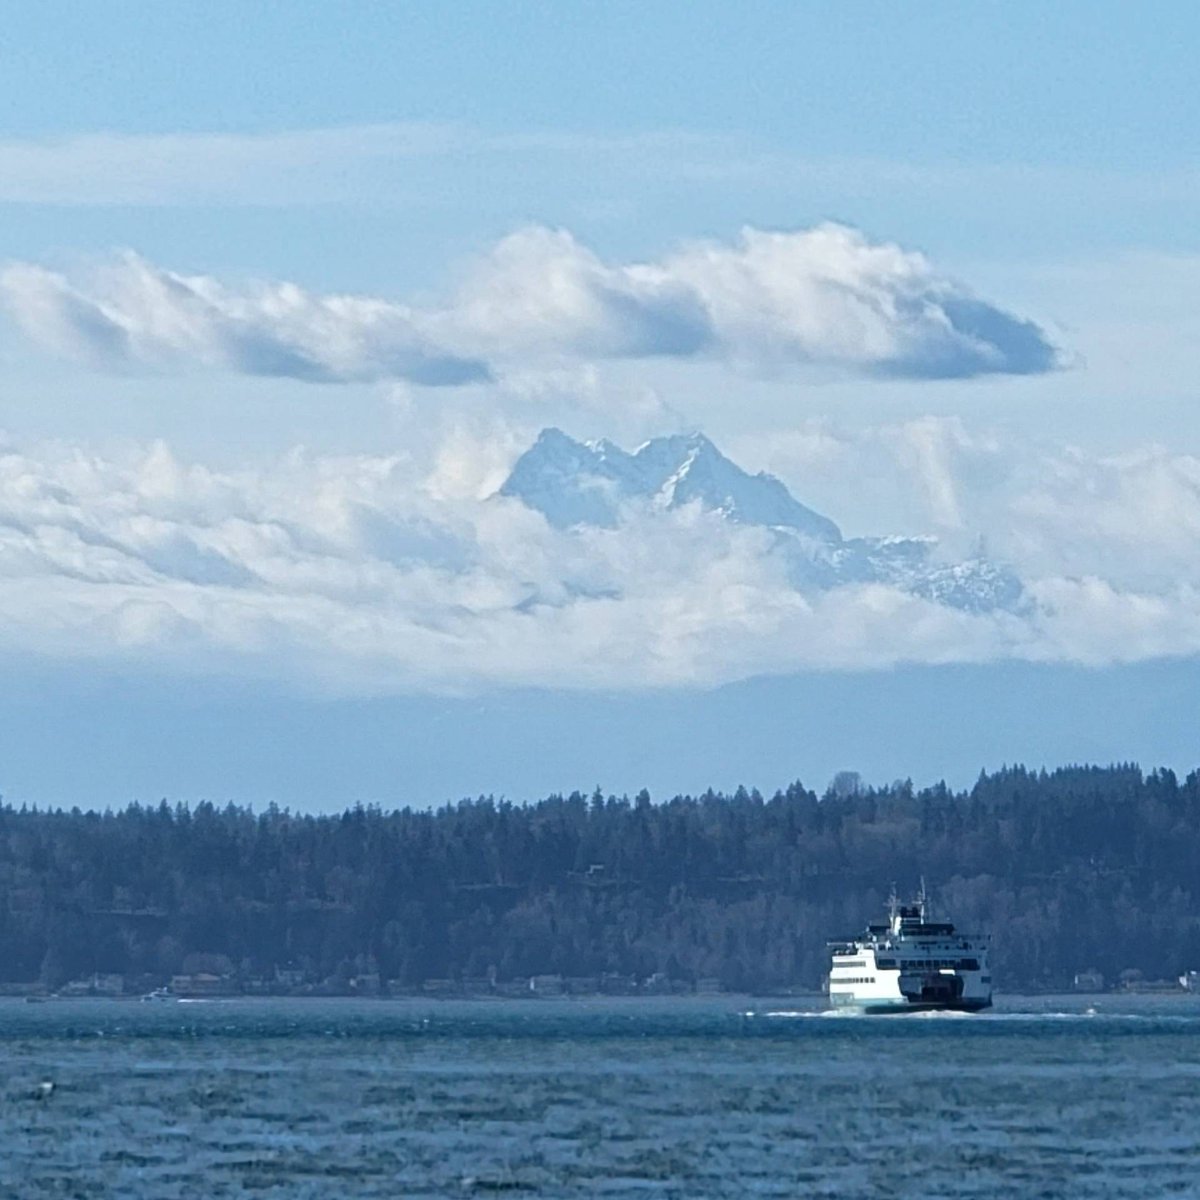 The view from #Alki yesterday 😍 

#Seattle
#PugetSound 
#OlympicMountains